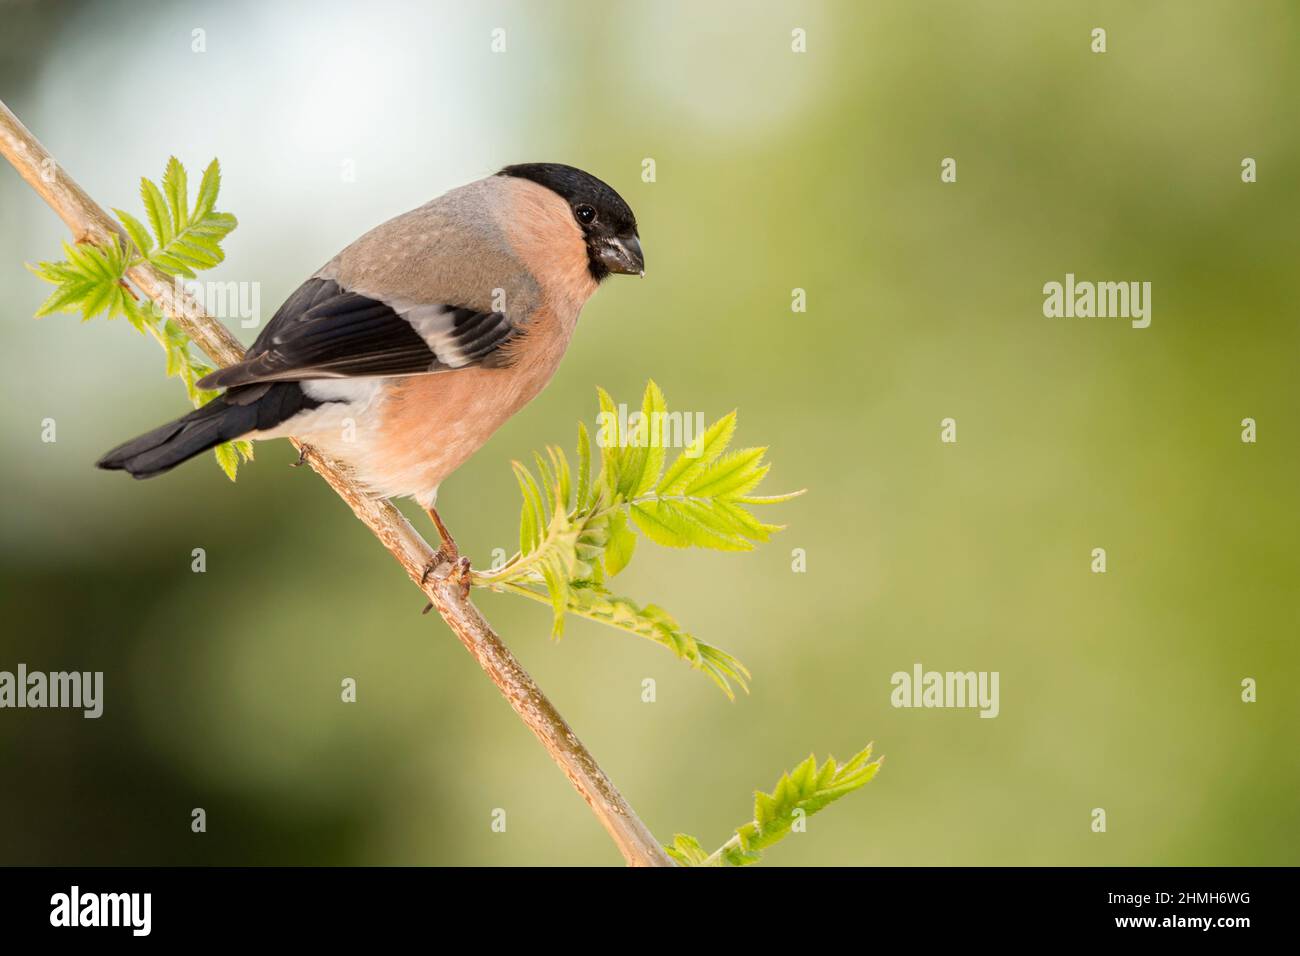 female bullfinch standing on a branch with new leaves Stock Photo